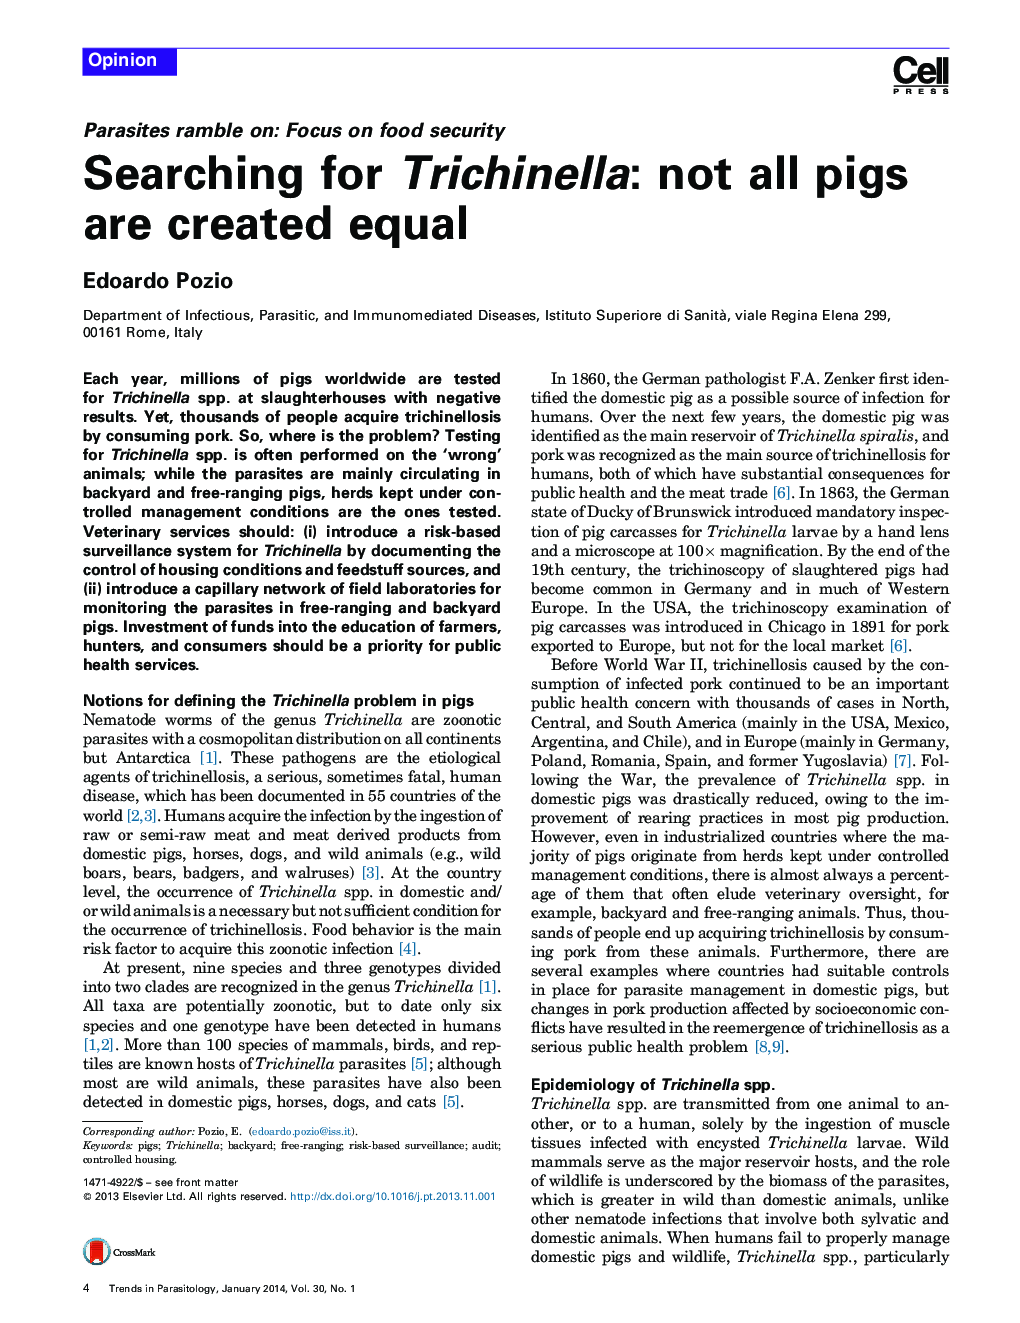 Searching for Trichinella: not all pigs are created equal